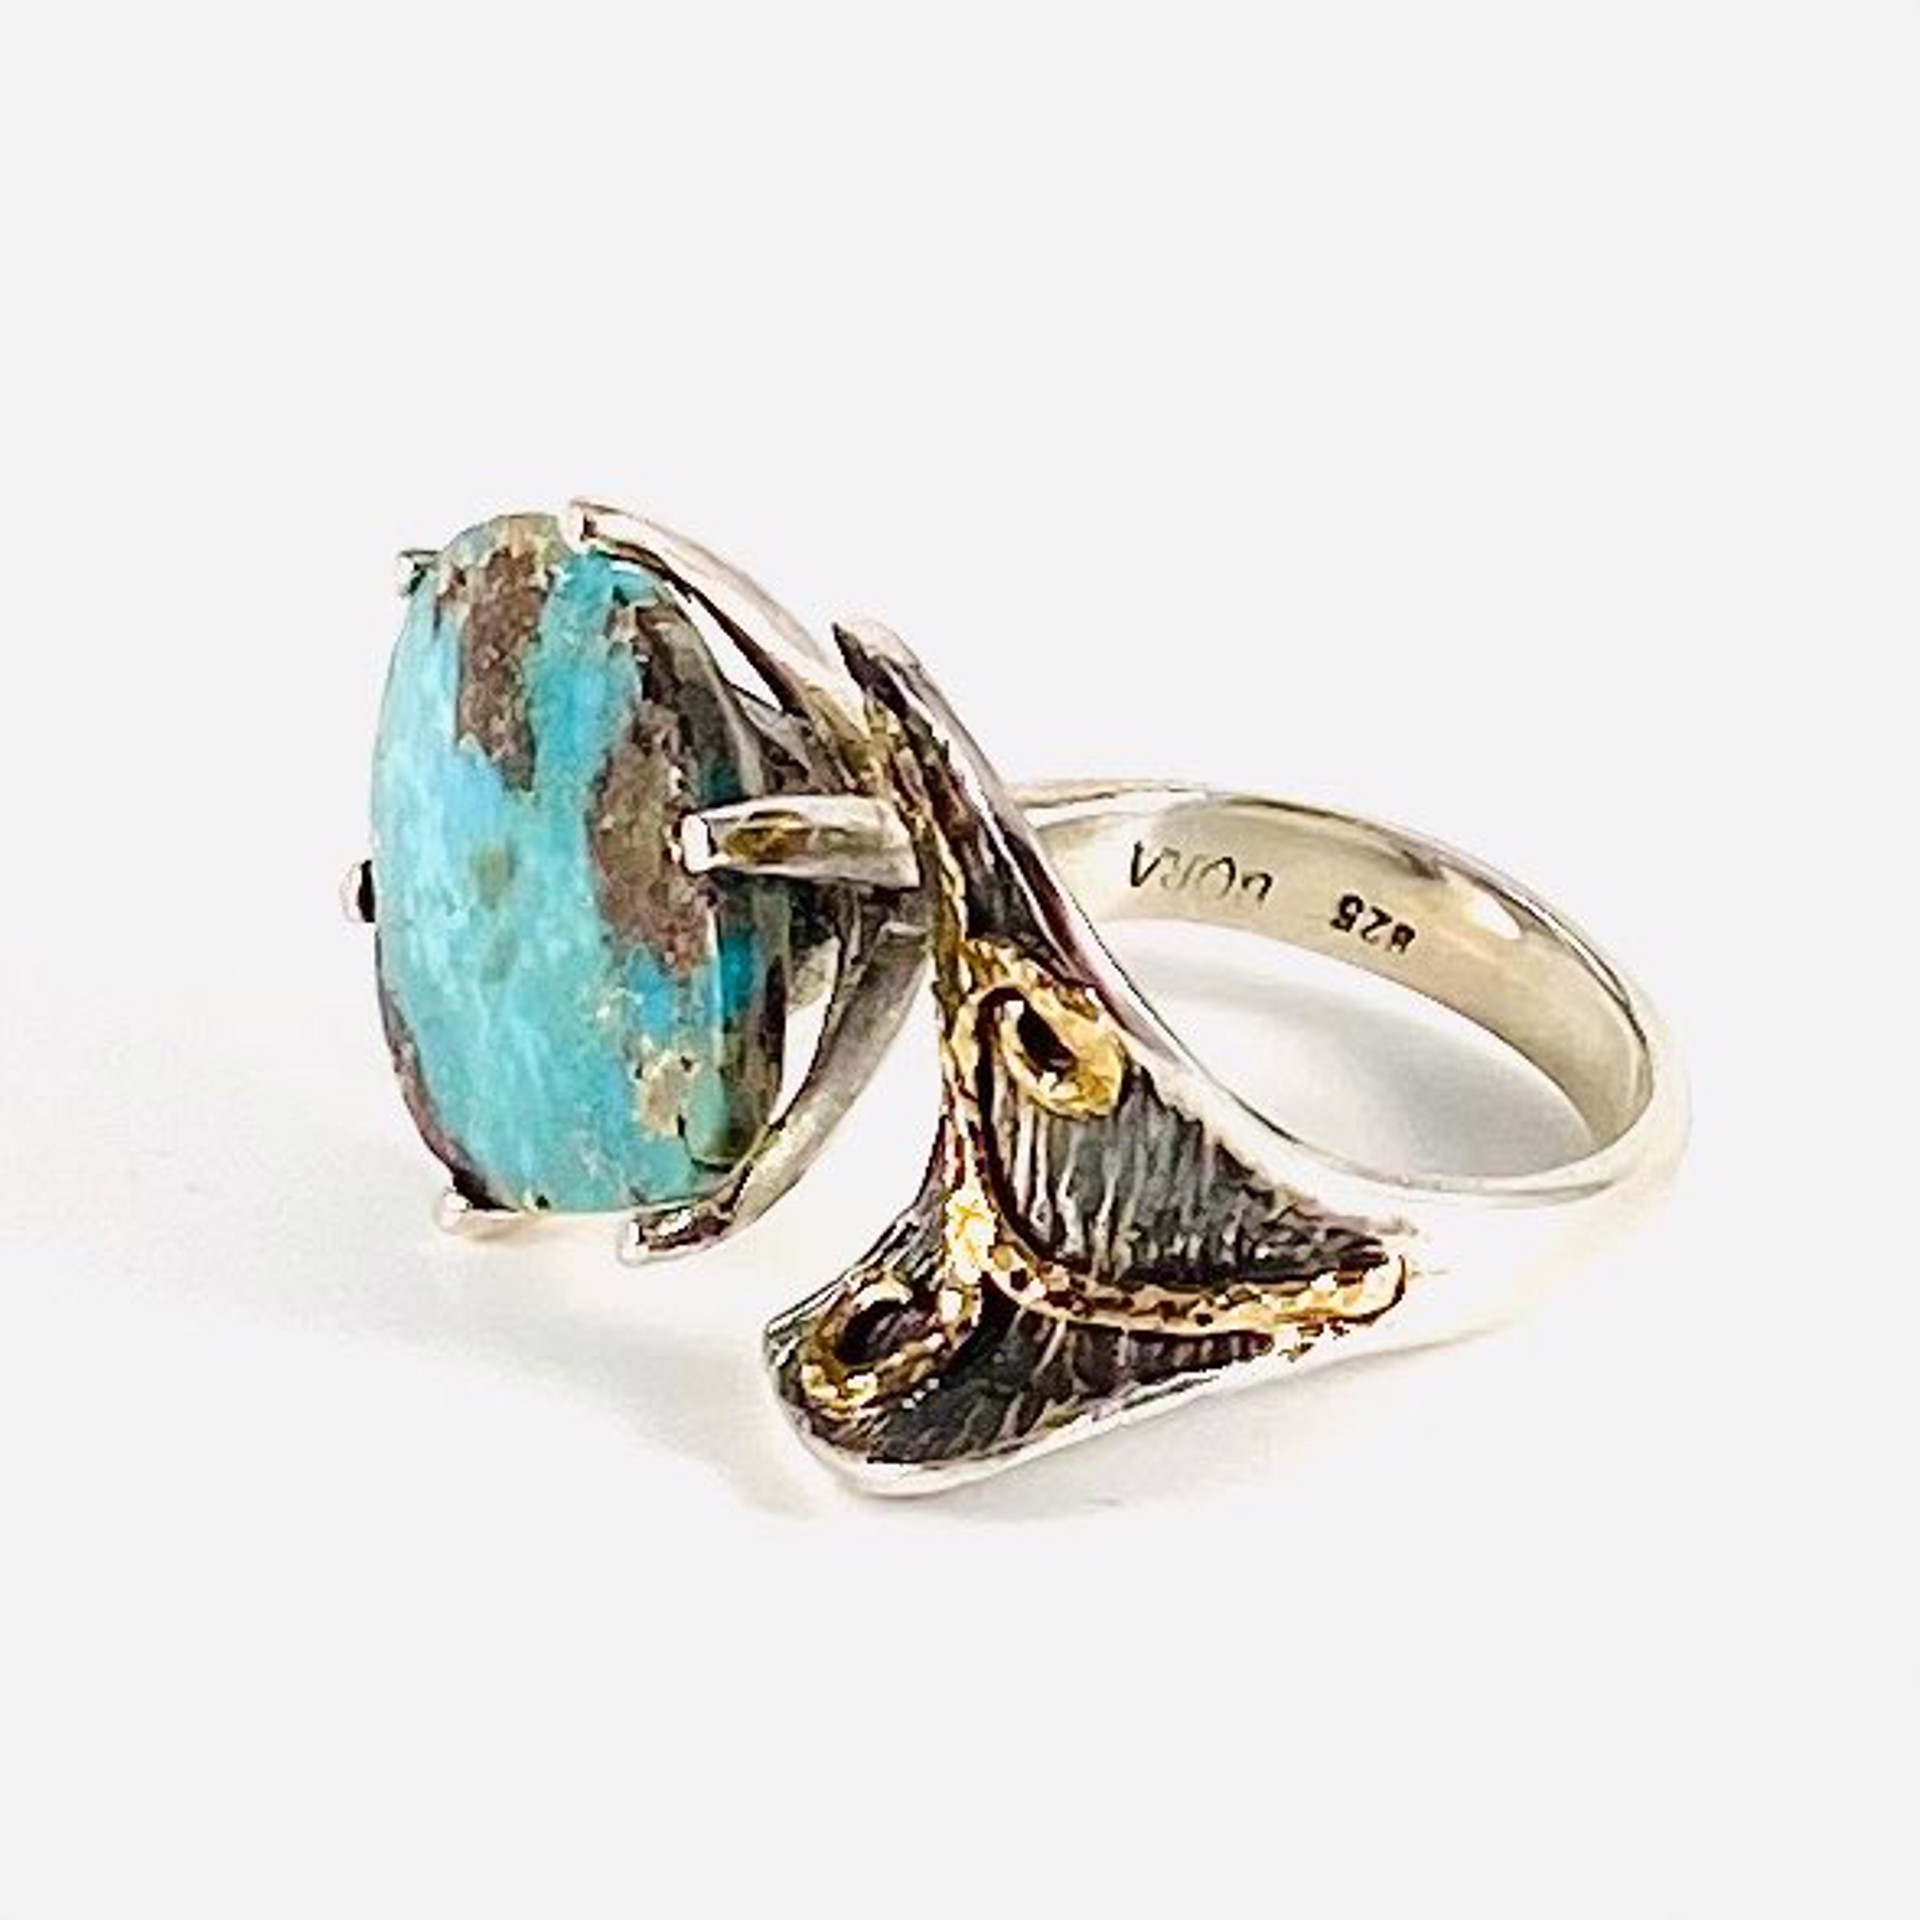 Teardrop Persian Turquoise Whale Tail Ring sz7.75 by Bora